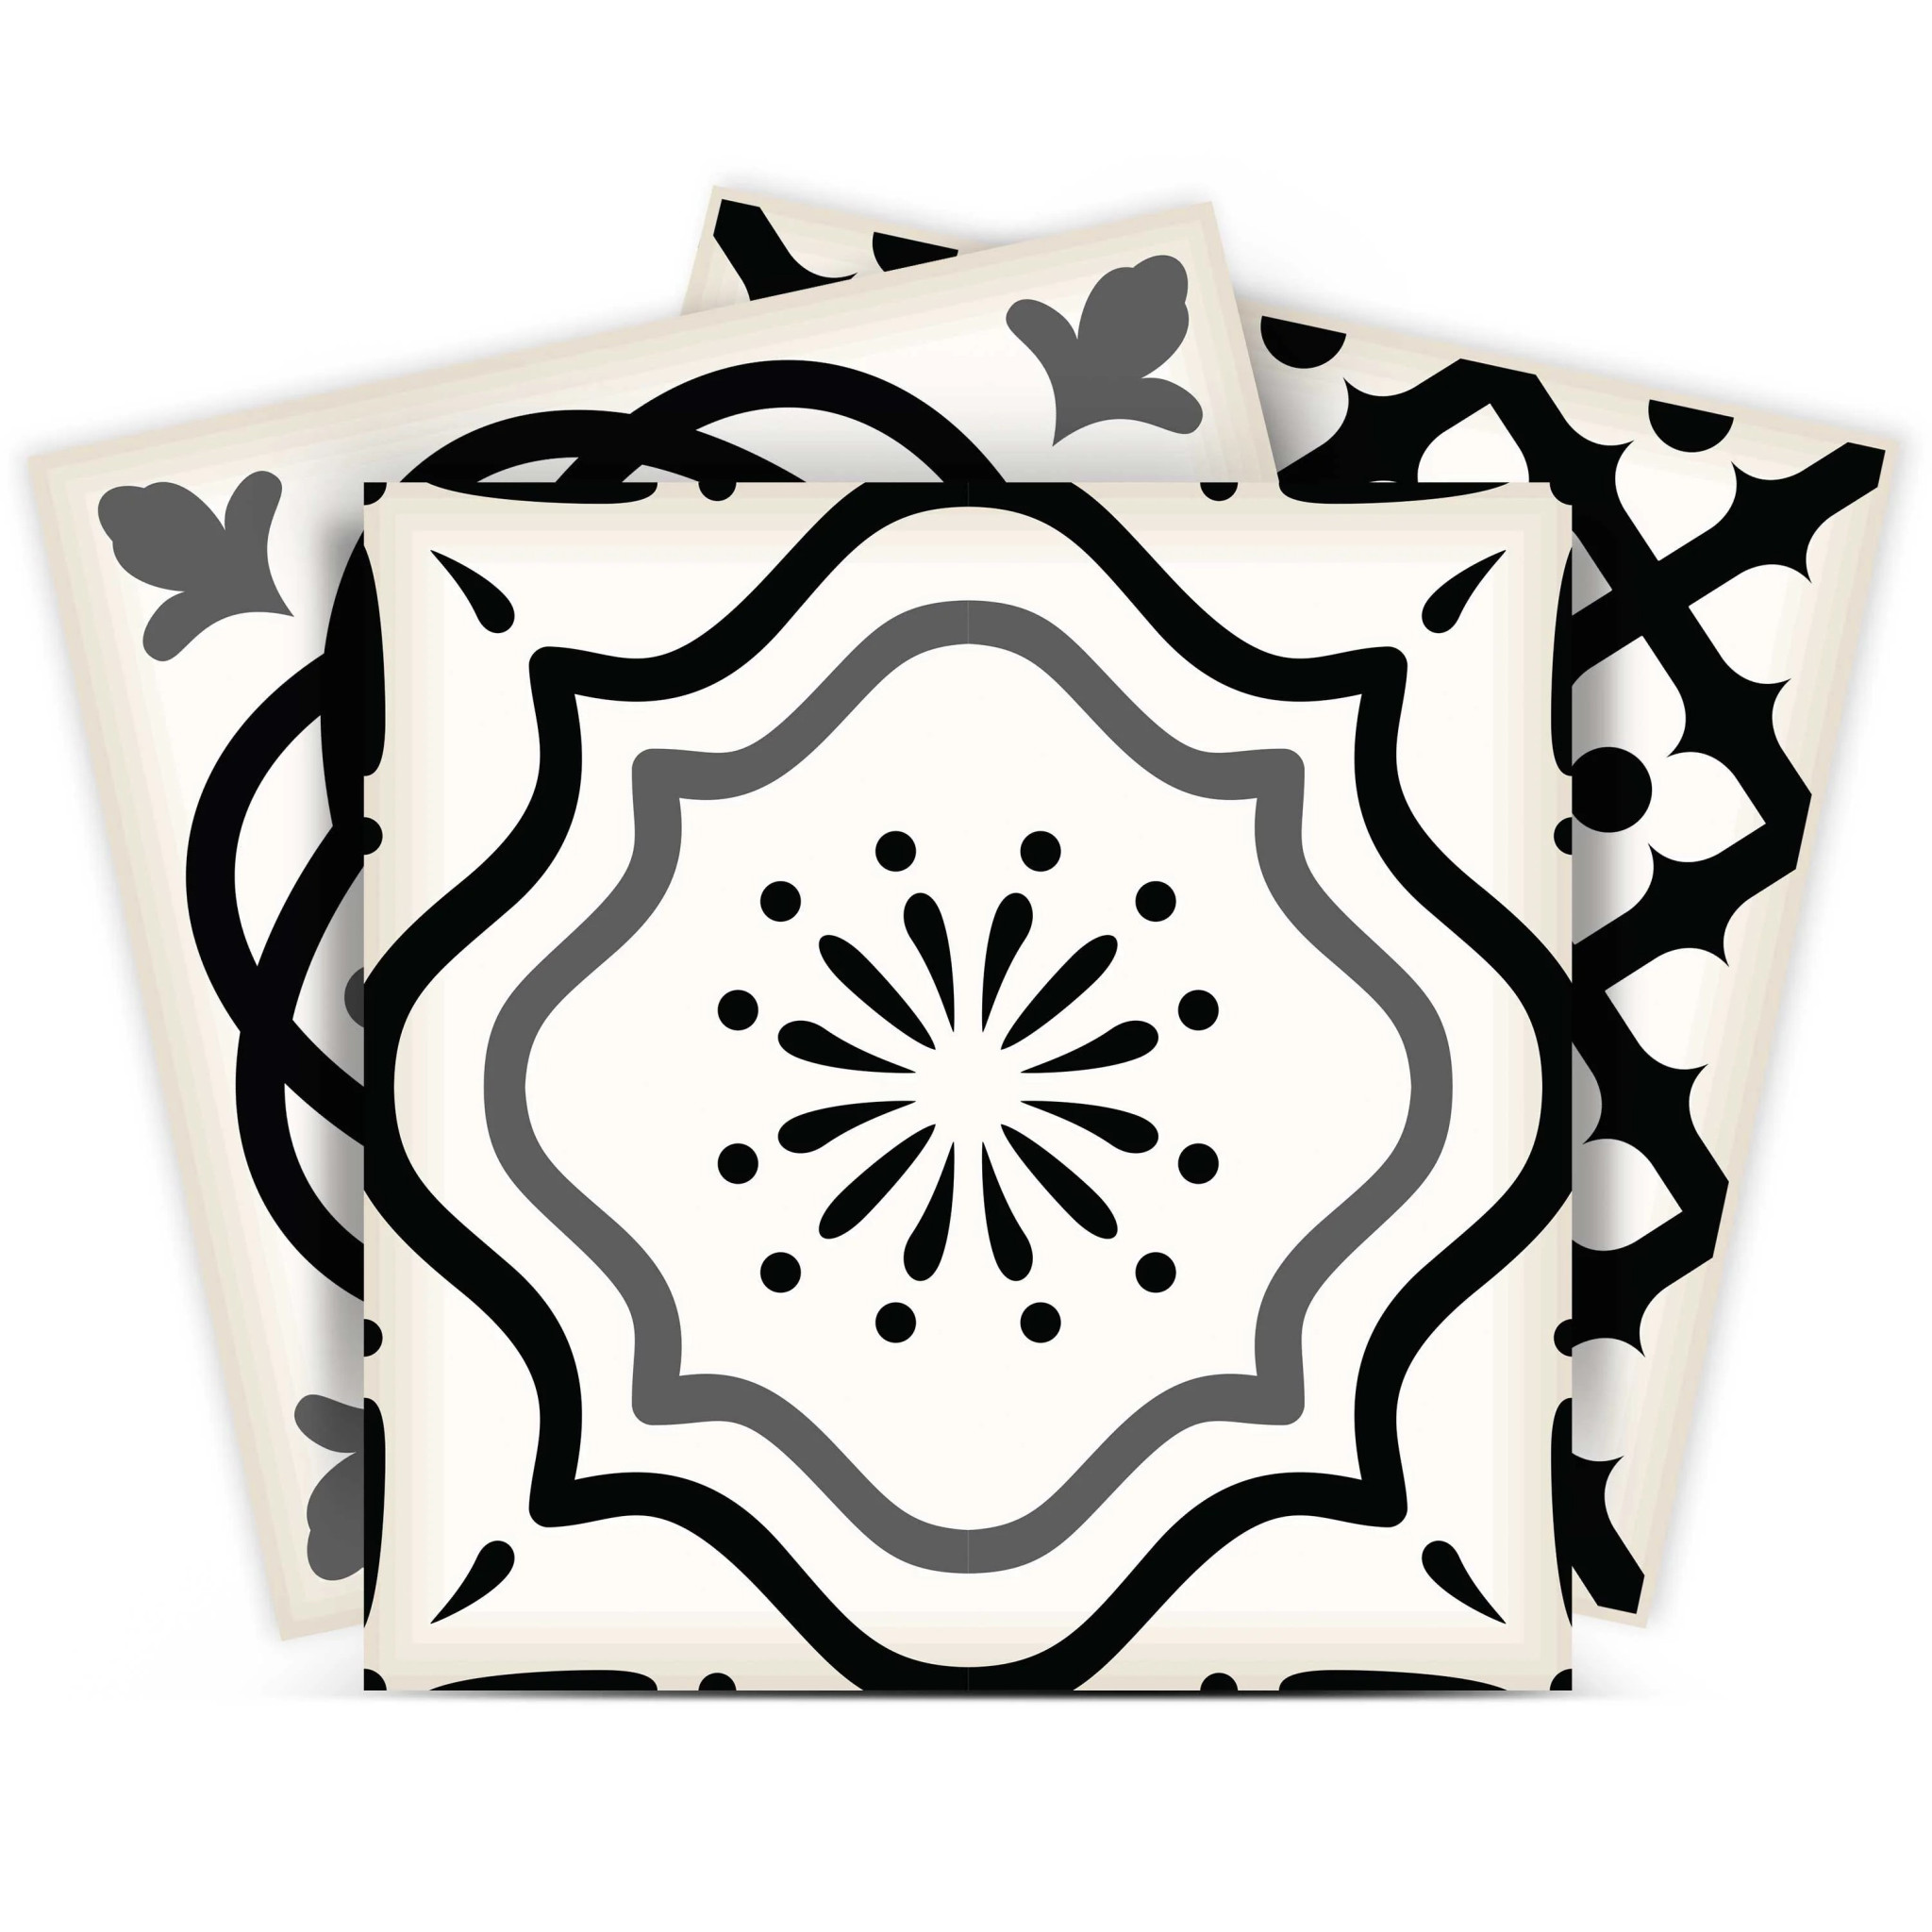 7" X 7" Black and White Multi  Peel and Stick Removable Tiles-399863-1